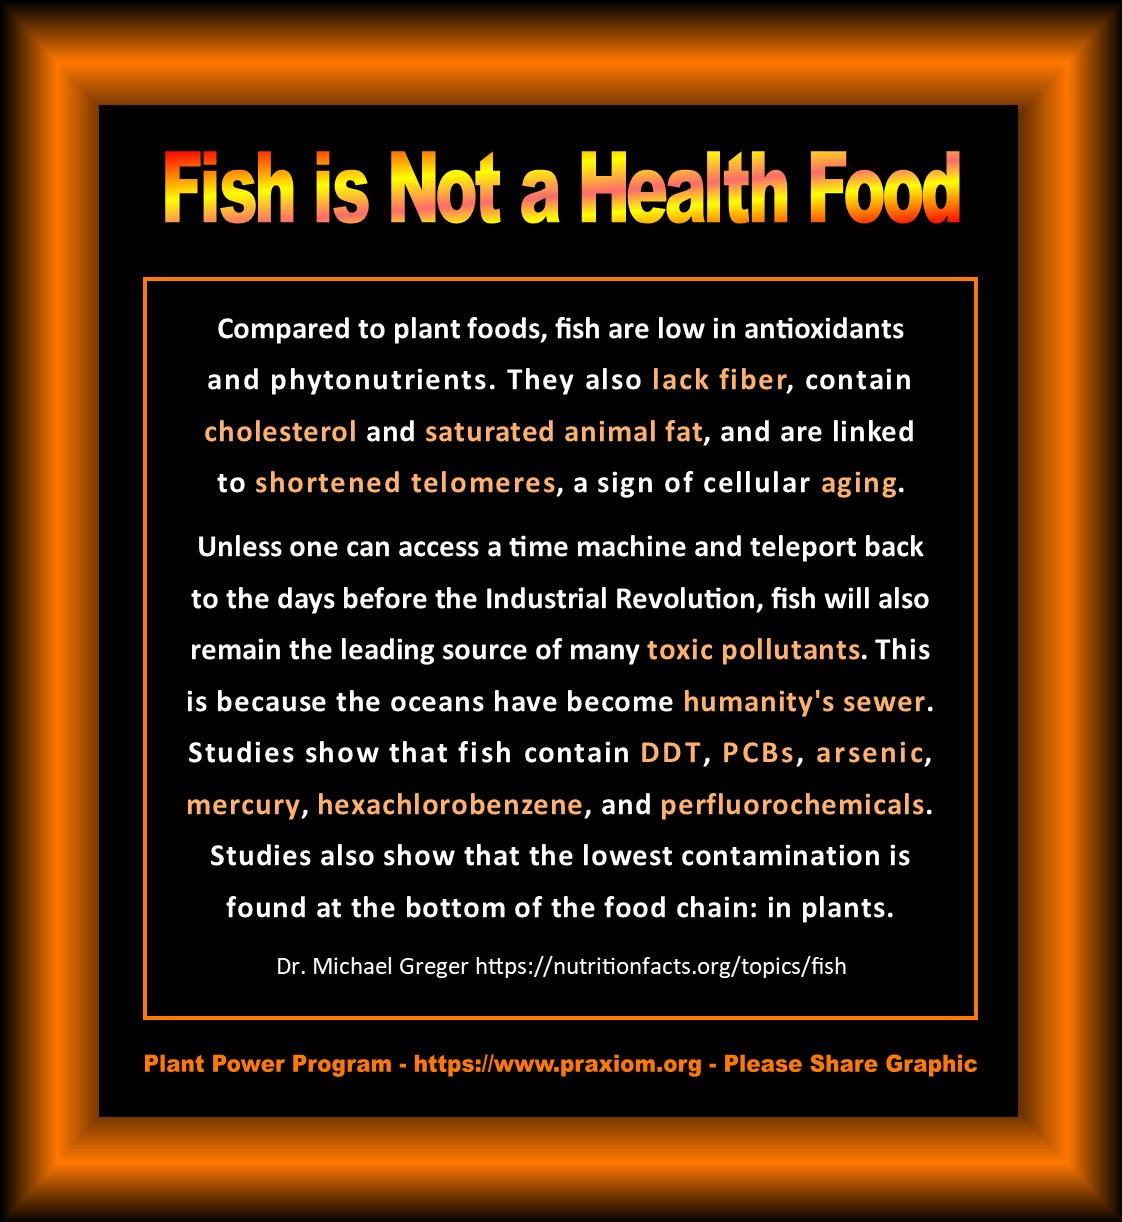 Is Fish a Health Food - Dr. Michael Greger